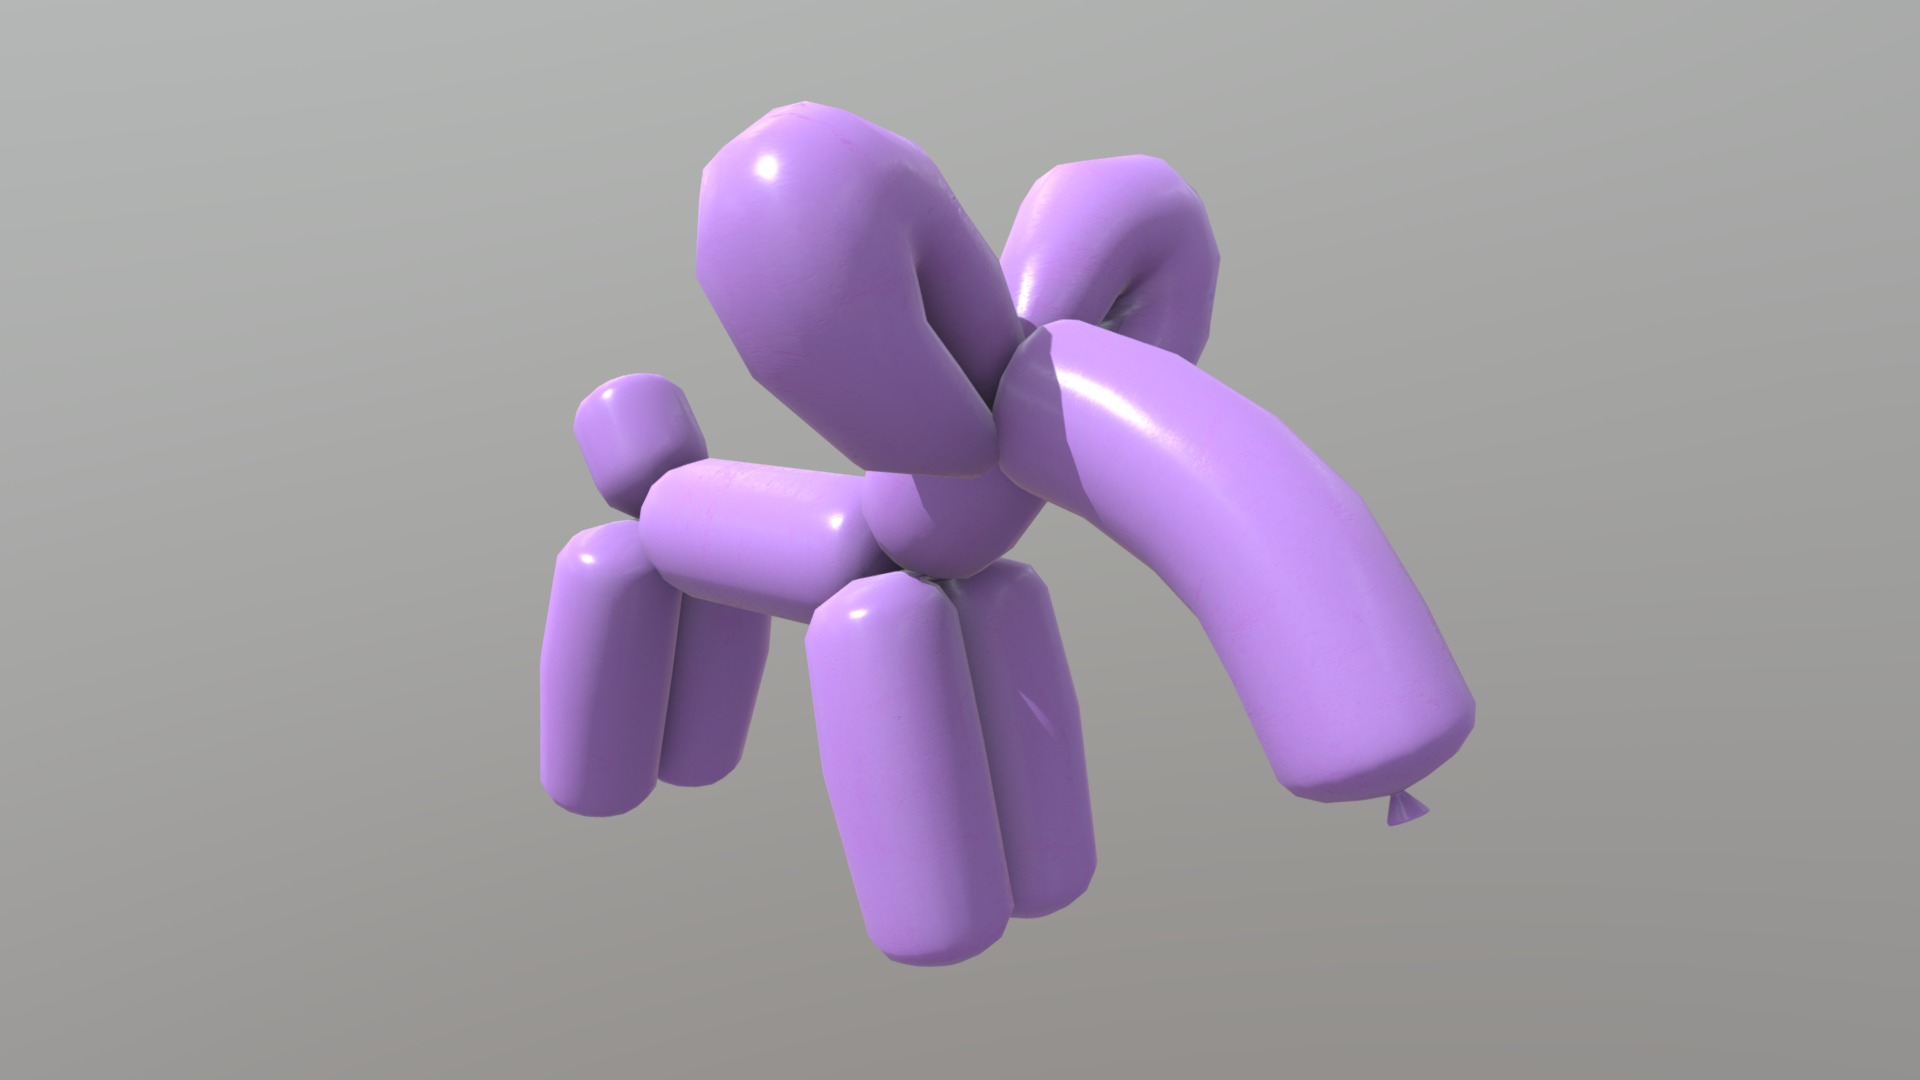 3D model Balloon Elephant - This is a 3D model of the Balloon Elephant. The 3D model is about a purple toy figure.